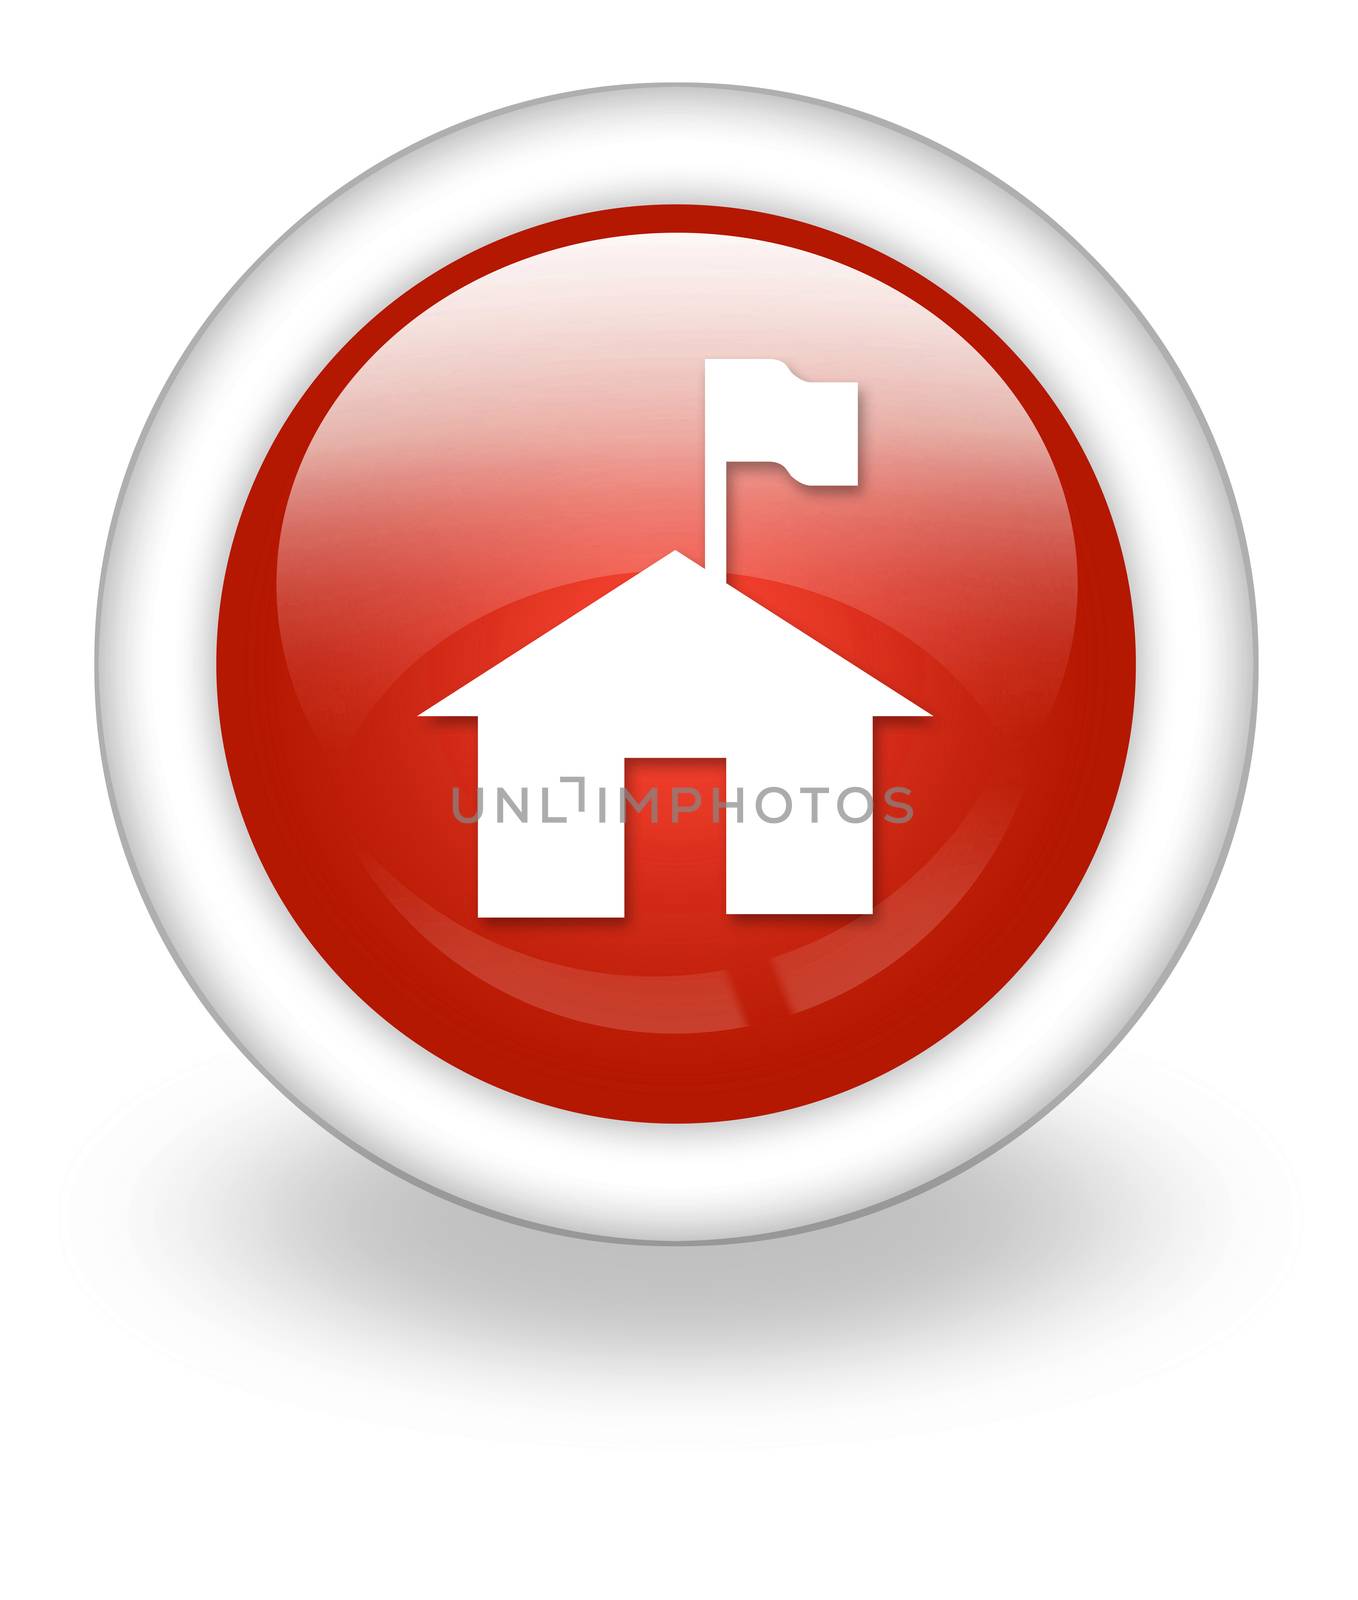 Icon, Button, Pictogram Ranger Station by mindscanner